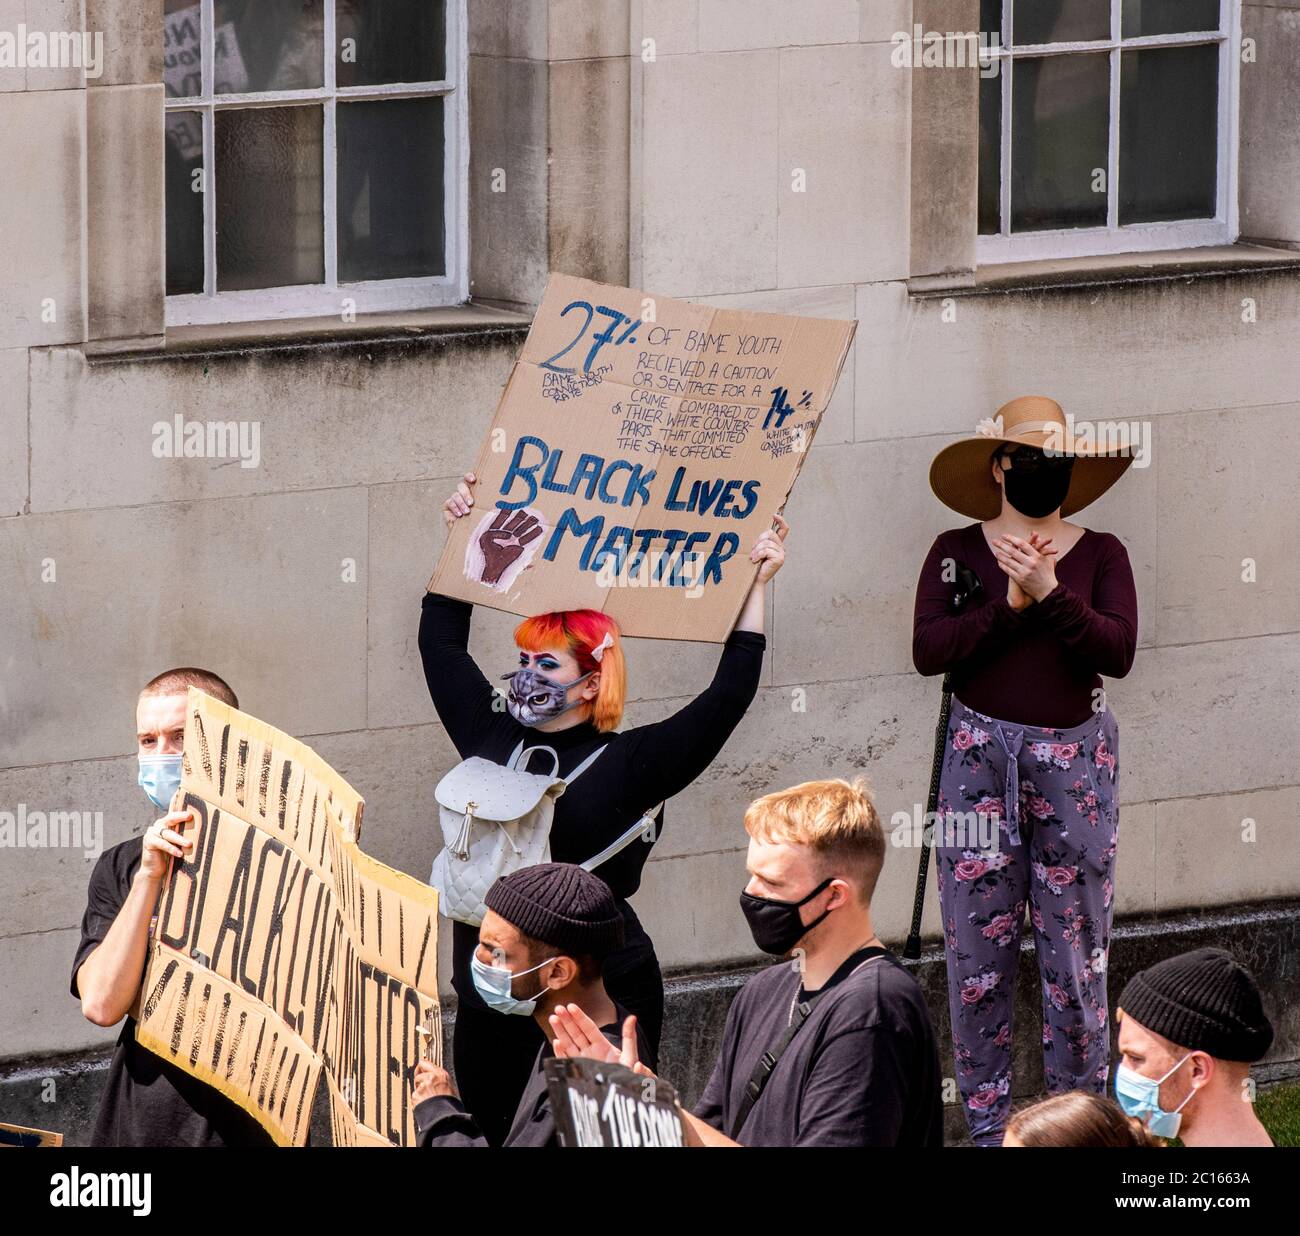 Leeds, 14th June 2020. A big crowd gathered in Leeds today for a very peaceful rally organised by Black Lives Matter and Black Voices Matter to protest against the murder of George Floyd and against racism. Credit: ernesto rogata/Alamy Live News Stock Photo